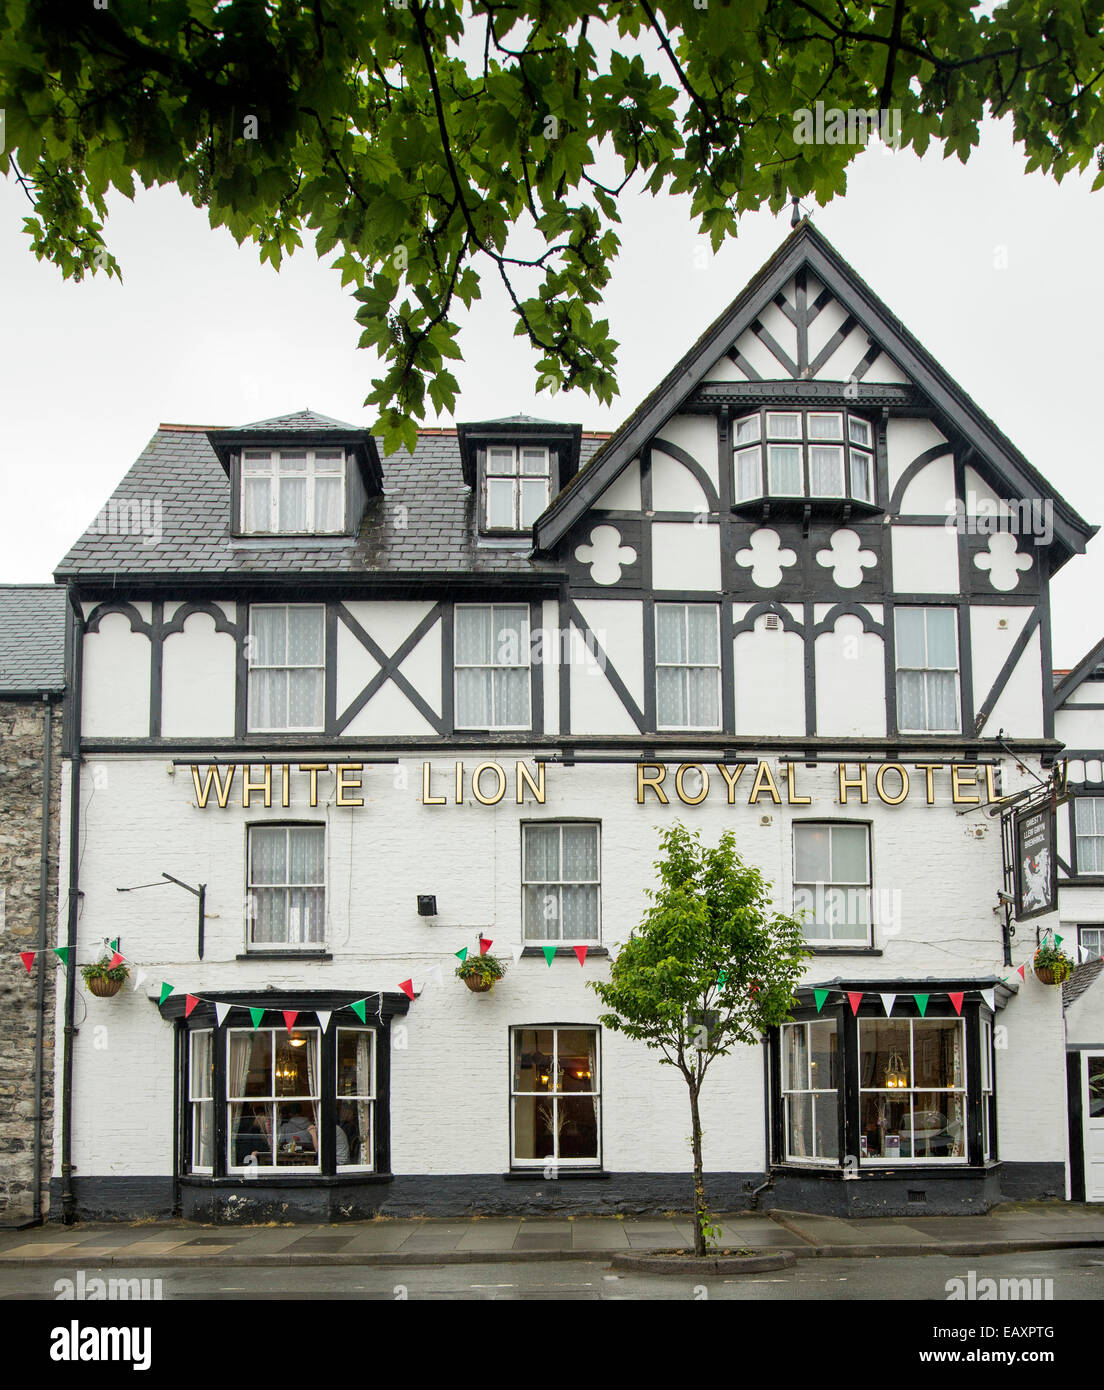 18th century White Lion Royal Hotel with ornate black and white Tudor style facade and overhanging trees in Welsh town of Bala Stock Photo